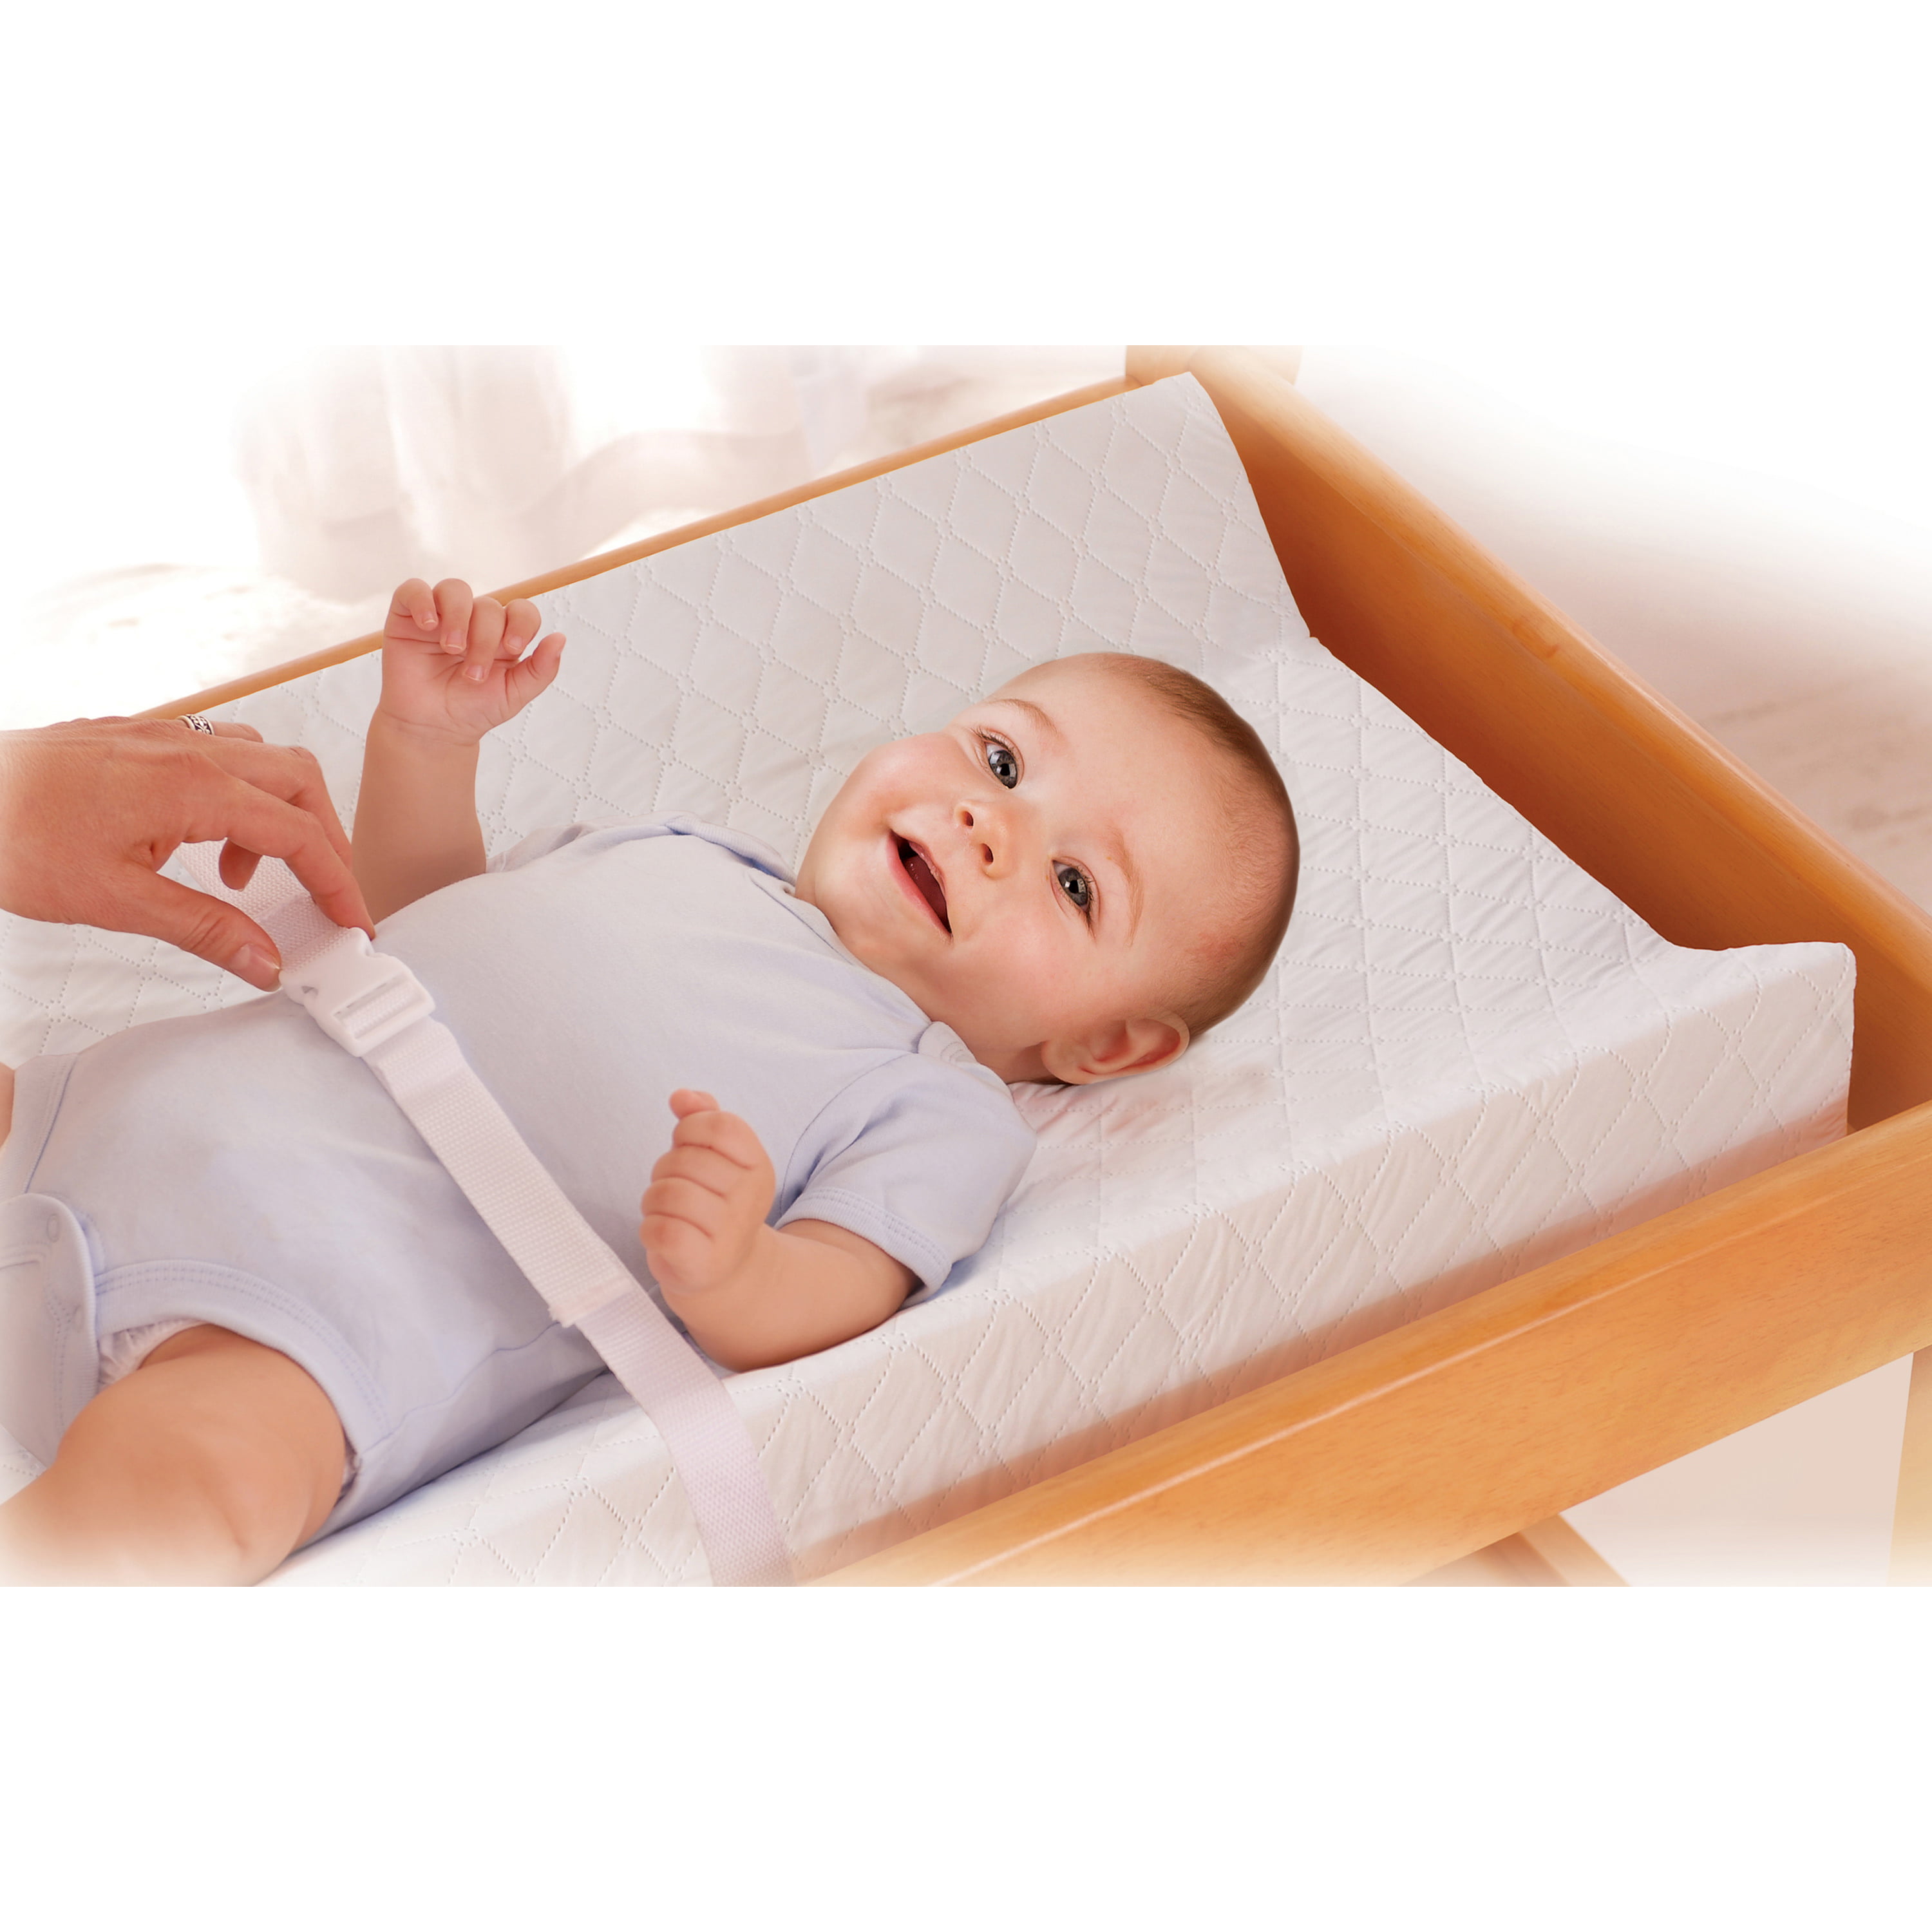 Summer Infant Contoured Changing Pad, 16” x 32”, White 